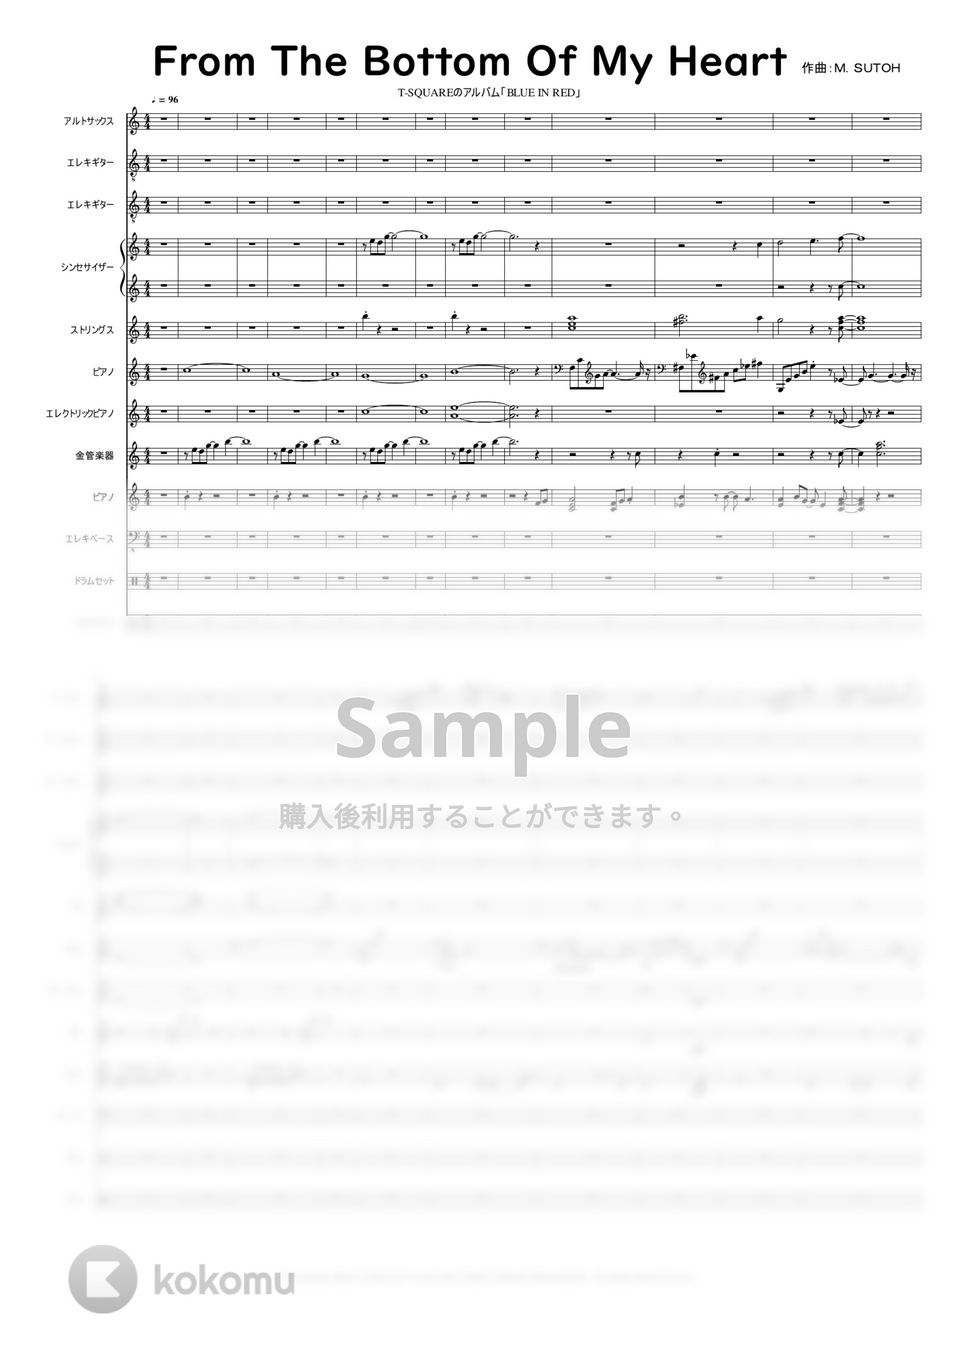 T-Square - FROM THE BOTTOM OF MY HEART (作曲：須藤満 M. SUTOH) by @MitsuruMinamiyama